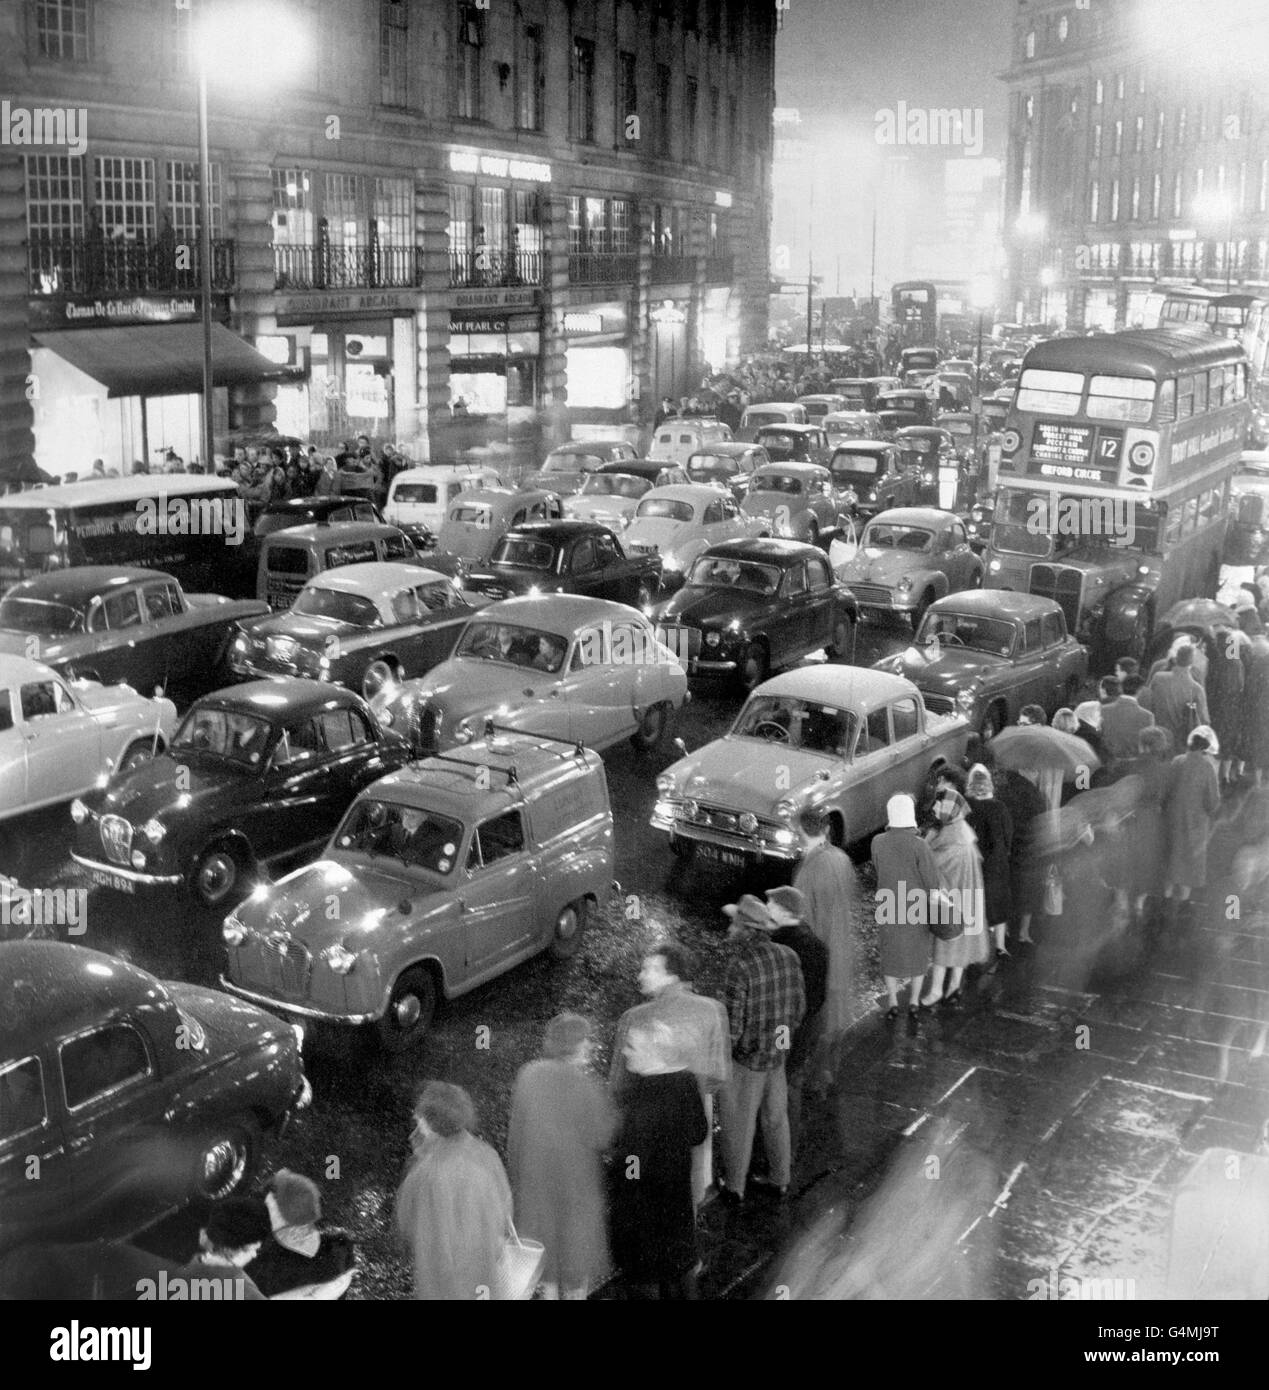 Long lines of cars stretch through the heart of London during the 24-hour rail strike. London had unprecedented traffic jams as commuters would not risk uncertainty over the rail service and underground tubes. A newspaper van can be seen carrying the banner 'Strike Scenes'. Stock Photo